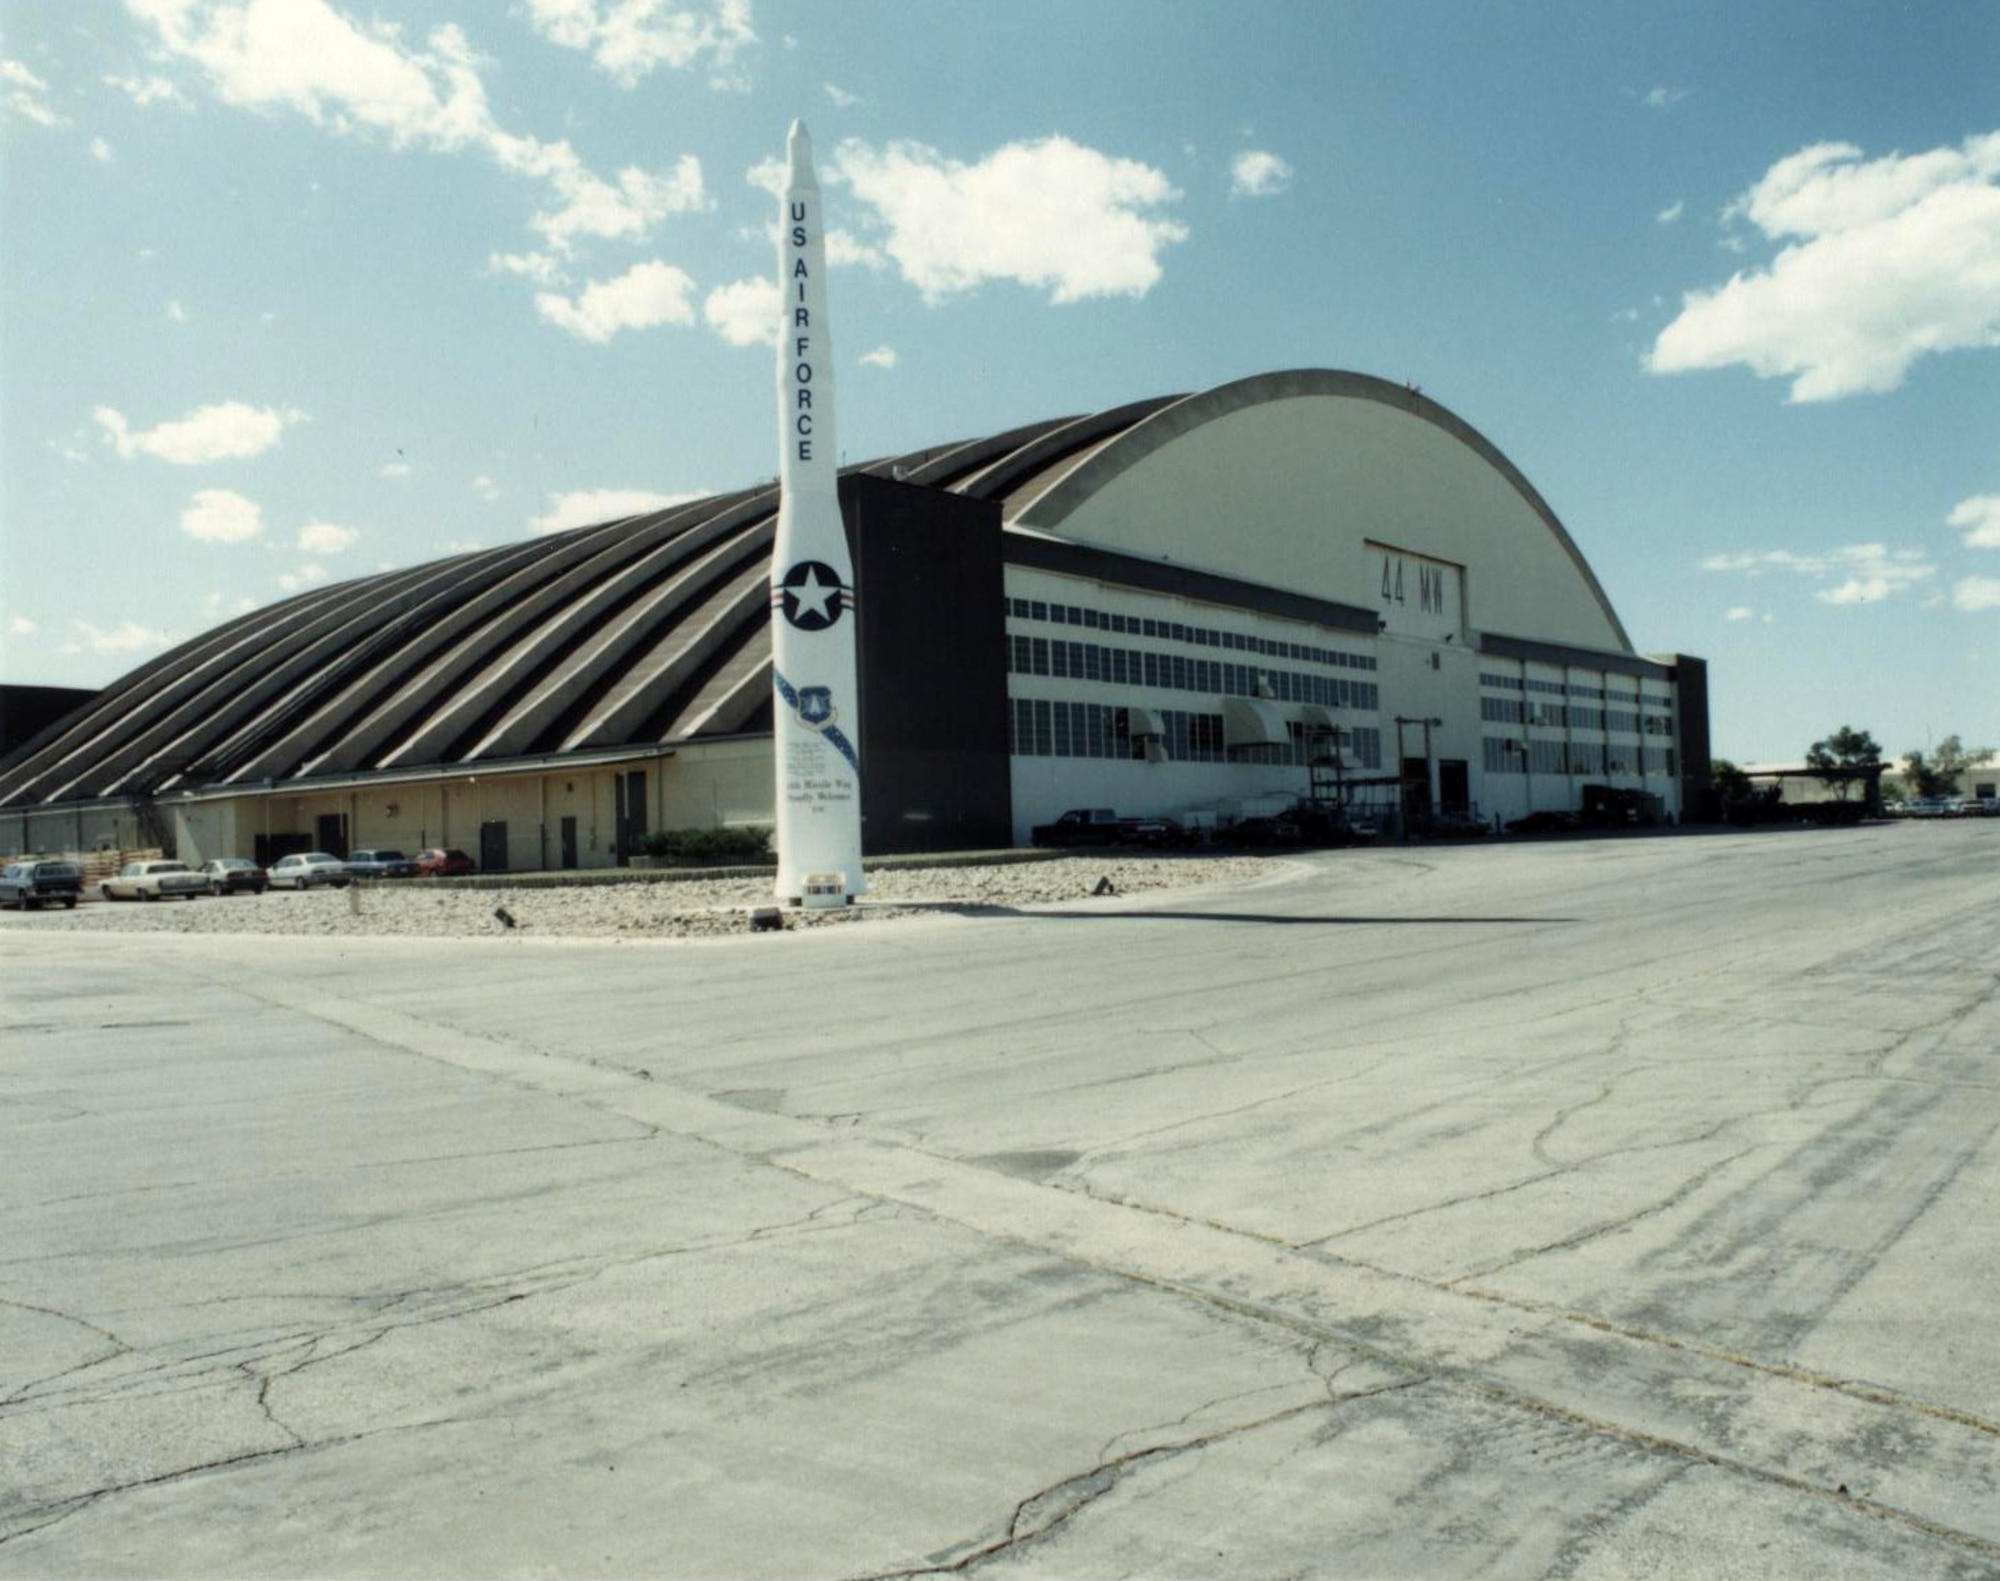 The inactivation of the 44th Missile Wing, at one time whose headquarters was in the Pride Hangar, brought a close to a key chapter in the history of Ellsworth Air Force Base, S.D., a time of heightened vigilance during the Cold War that began 1962. 
(U.S. Air Force courtesy photo)
